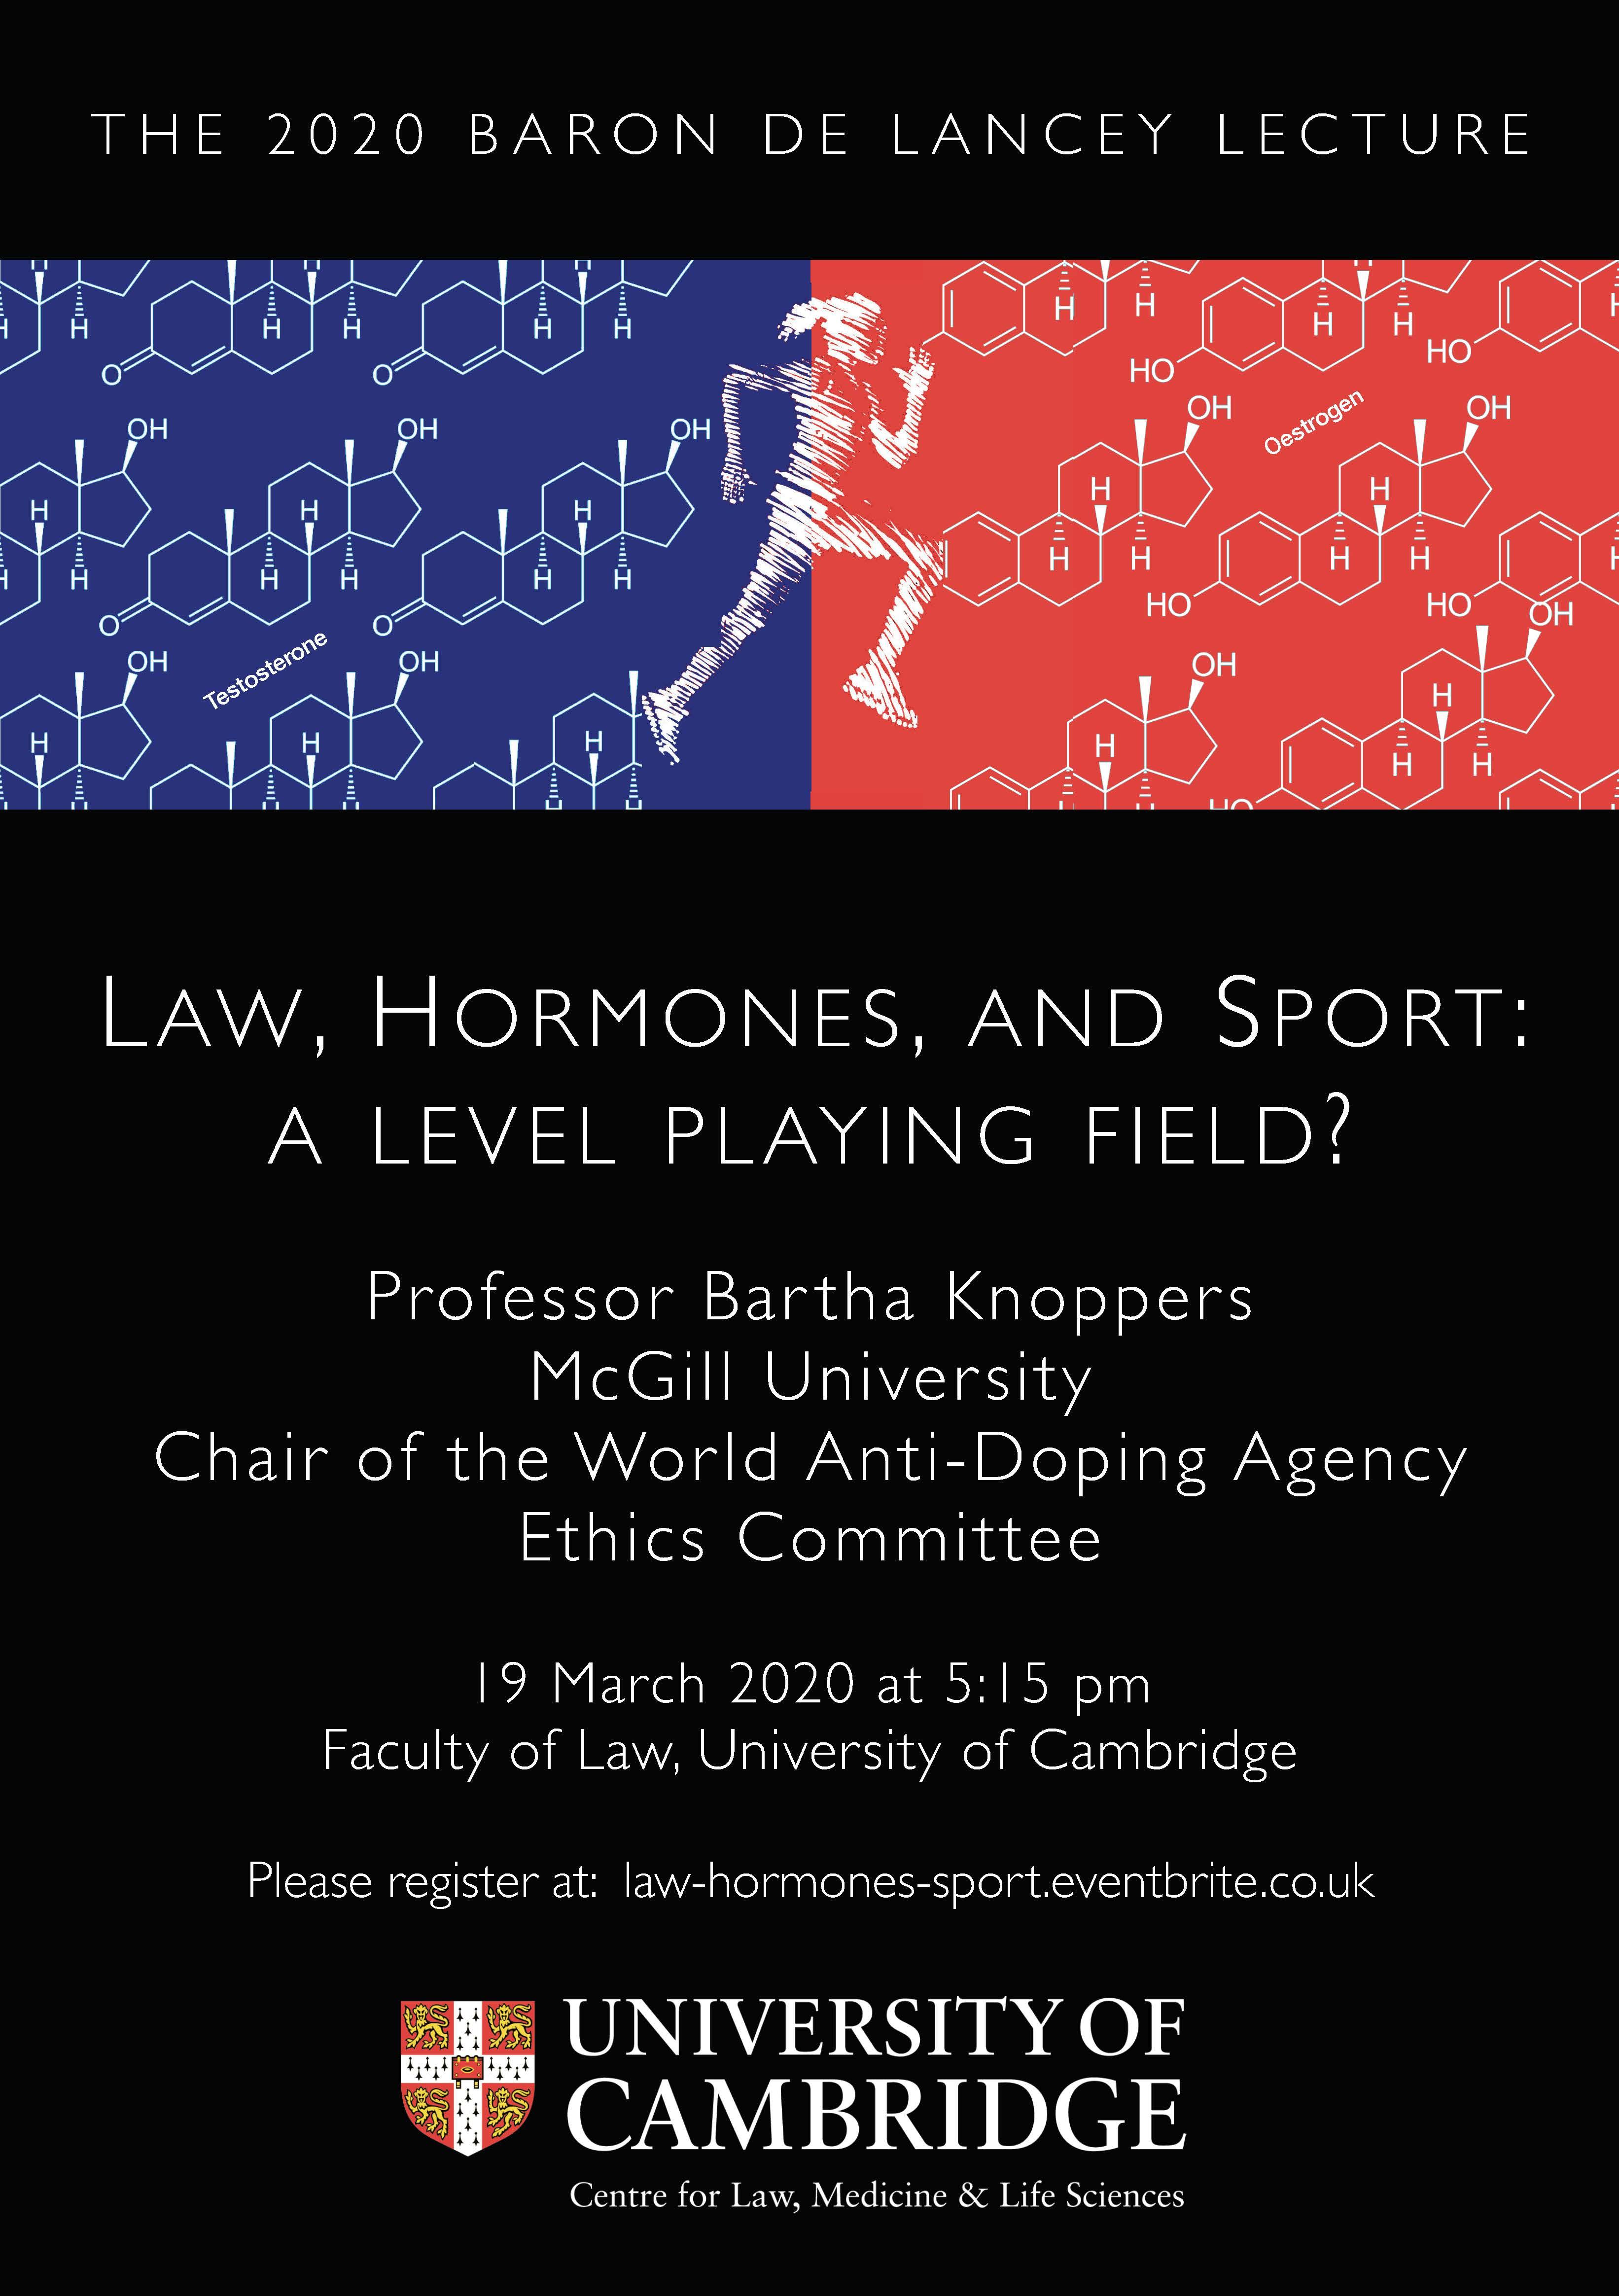 Poster for the Baron de Lancey Lecture 2020: Law, Hormones, and Sport: a level playing field?